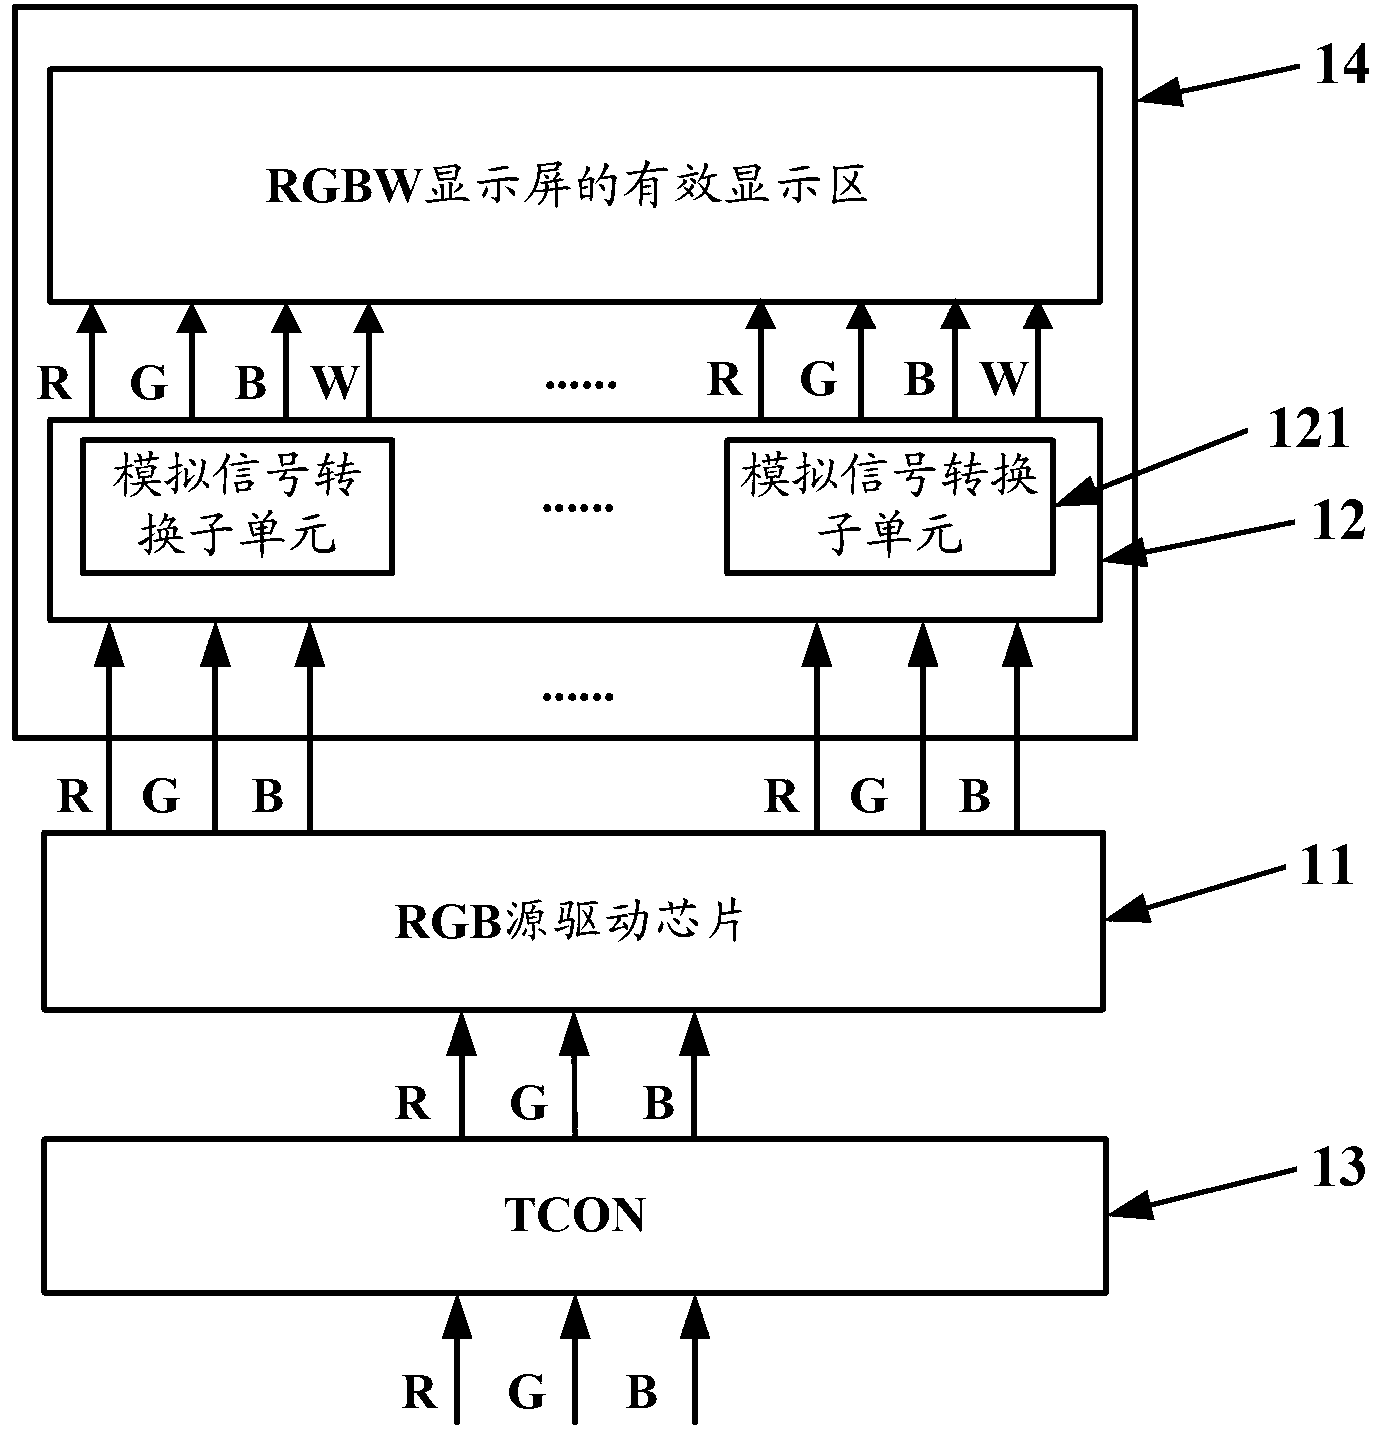 Driving system and method applicable to red, green, blue and white (RGBW) sub-pixel display screen